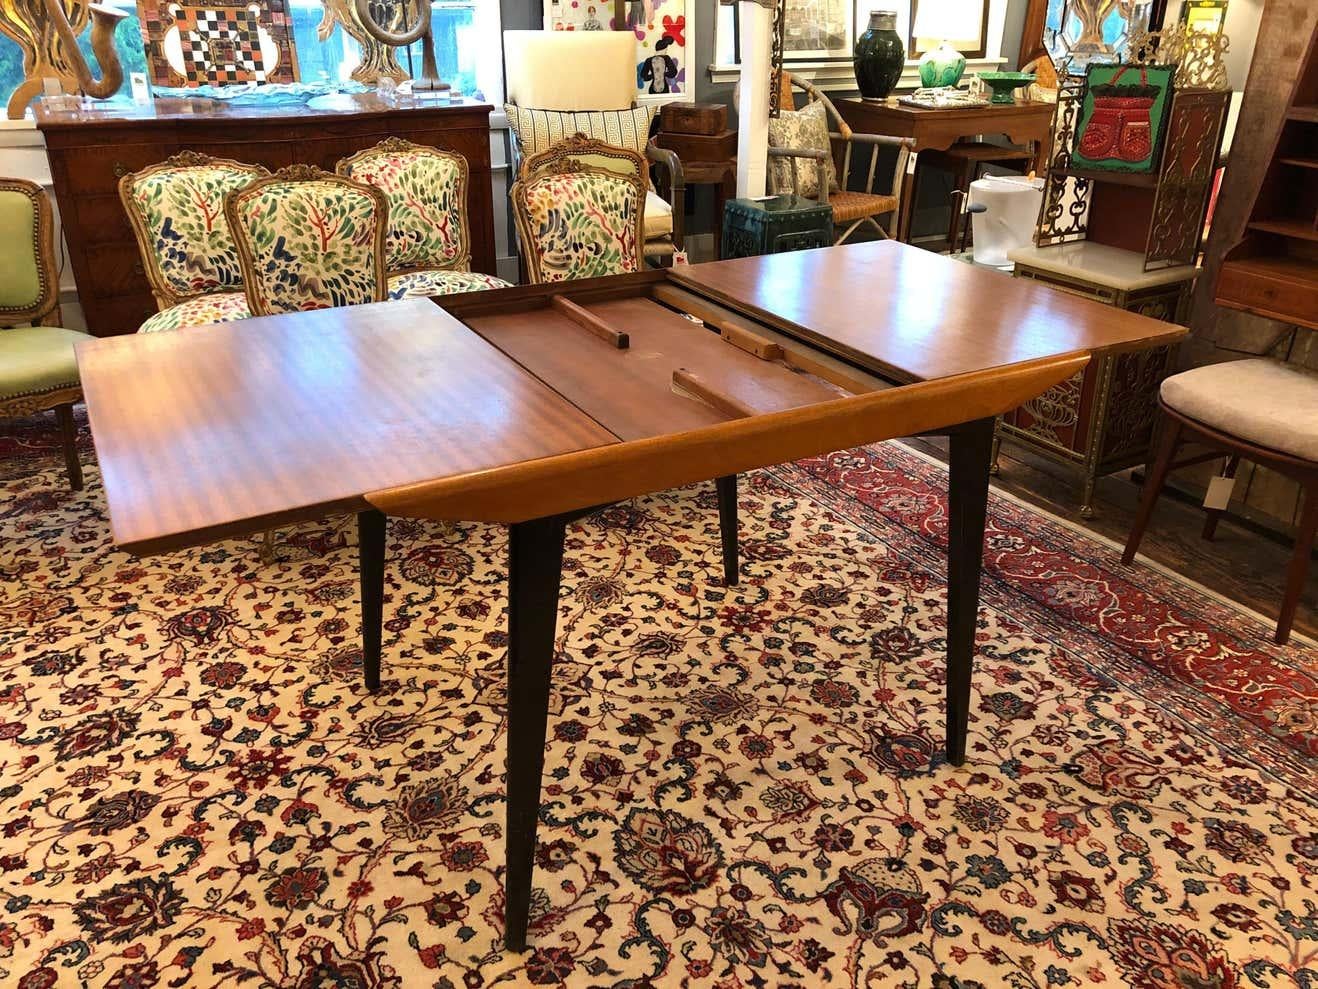 Early original sleek & clever English G Plan Mid-Century Modern dining table having ingenious design with hidden single leaf that spins over to extend the table to 59.5. Legs are tapered, elegant and ebonized to make a nice contrast with the rich